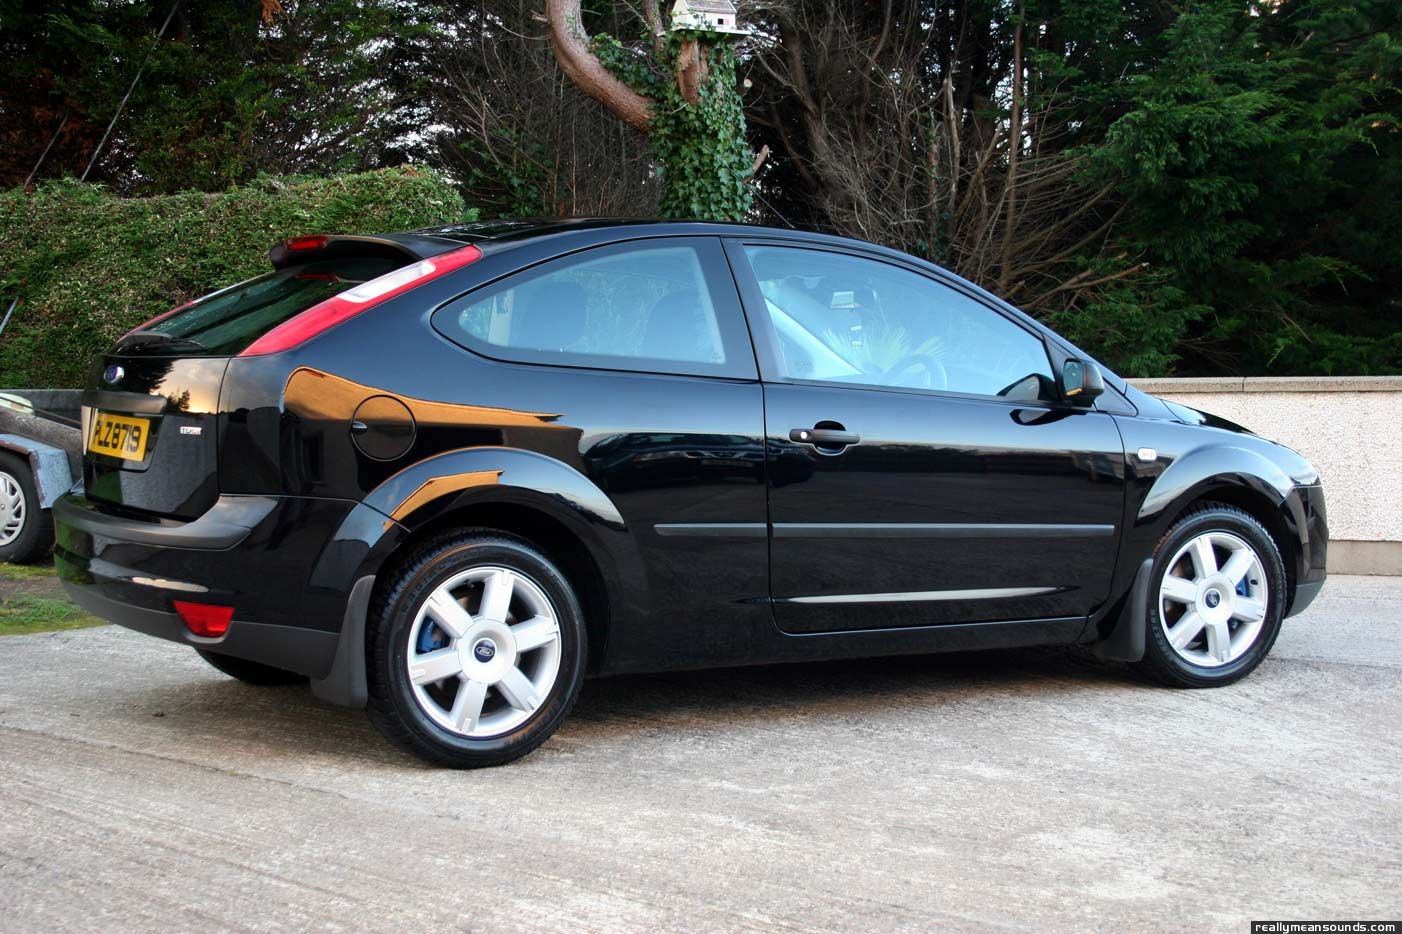 's Ford Focus 1.8 TDCi Sport (2005) RMS Garage